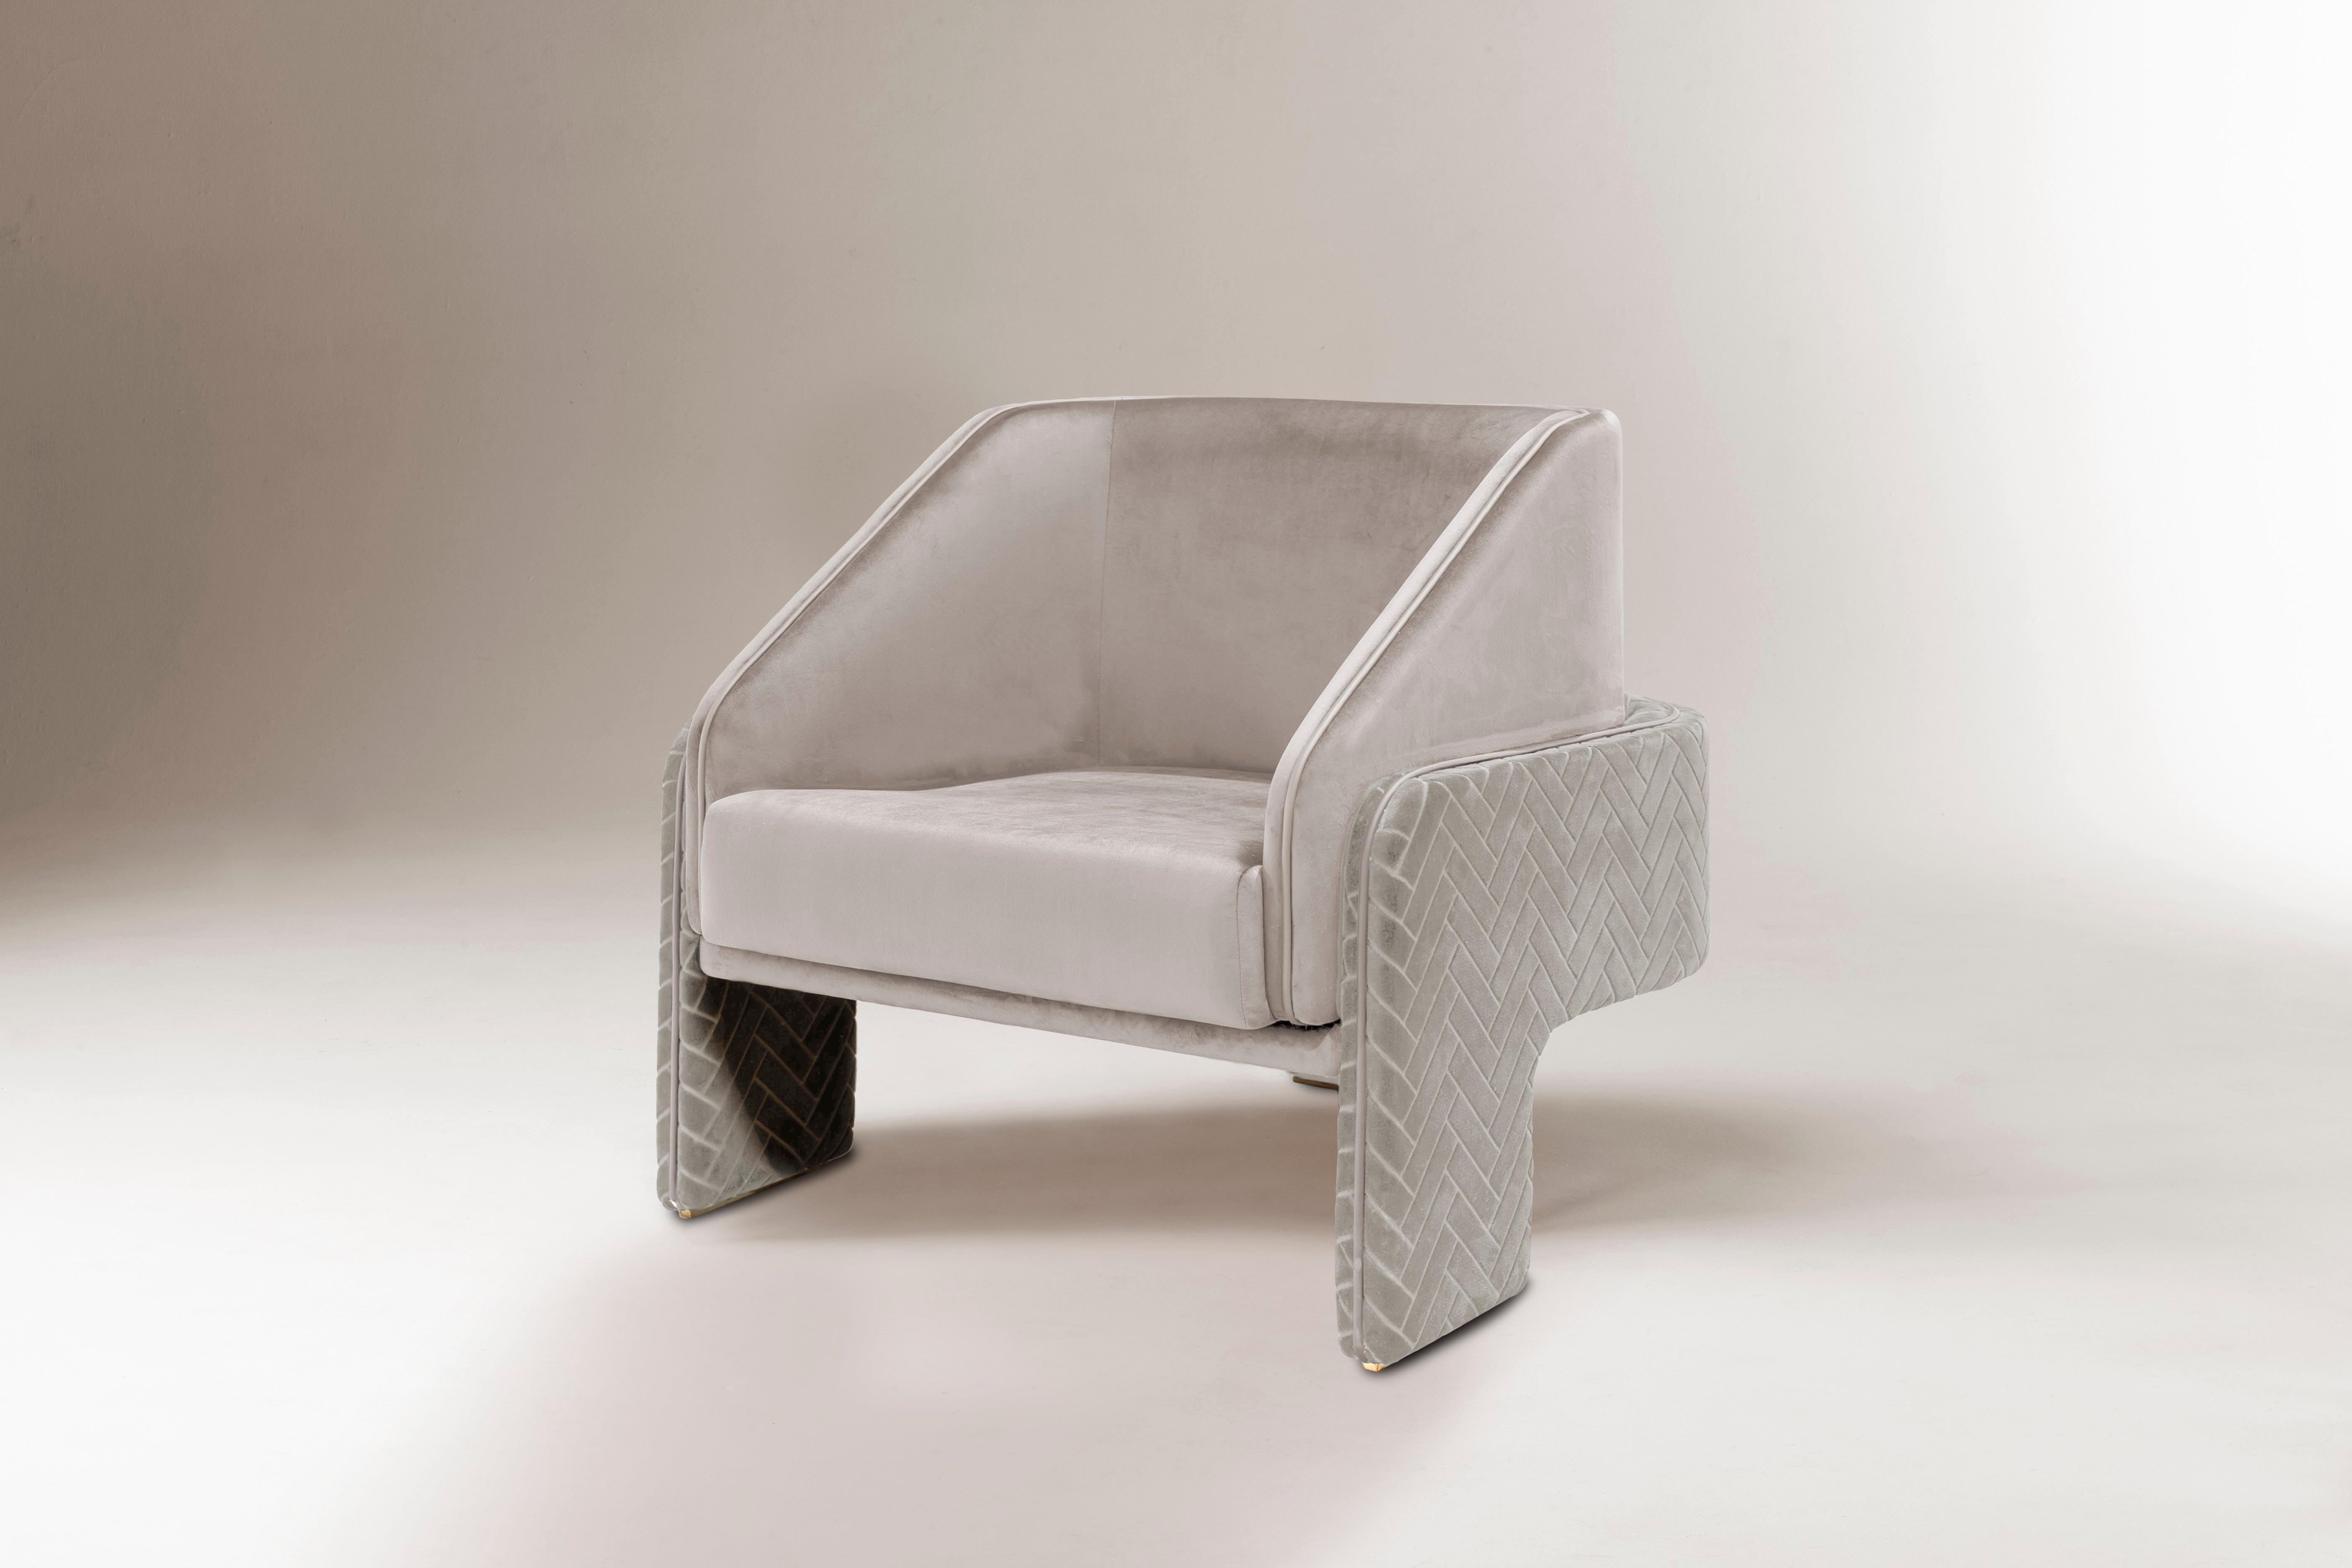 L’Unité armchair is proportional and sculptural, perfectly made to the human scale. It gathers strong upholstered shapes lightly supported on elegant stands. A piece that excites the eye and imagination, inspired by modernist architecture’s style